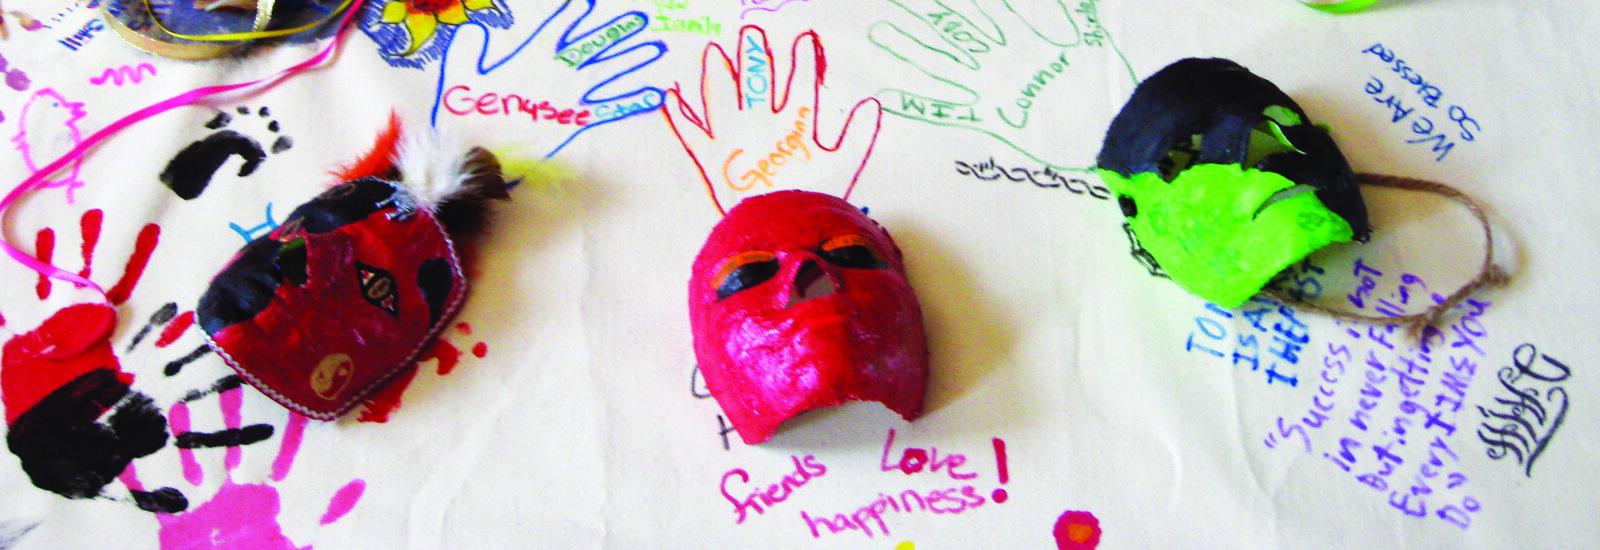 With assistance from Arts in Society, Hope West helps kids through grief.